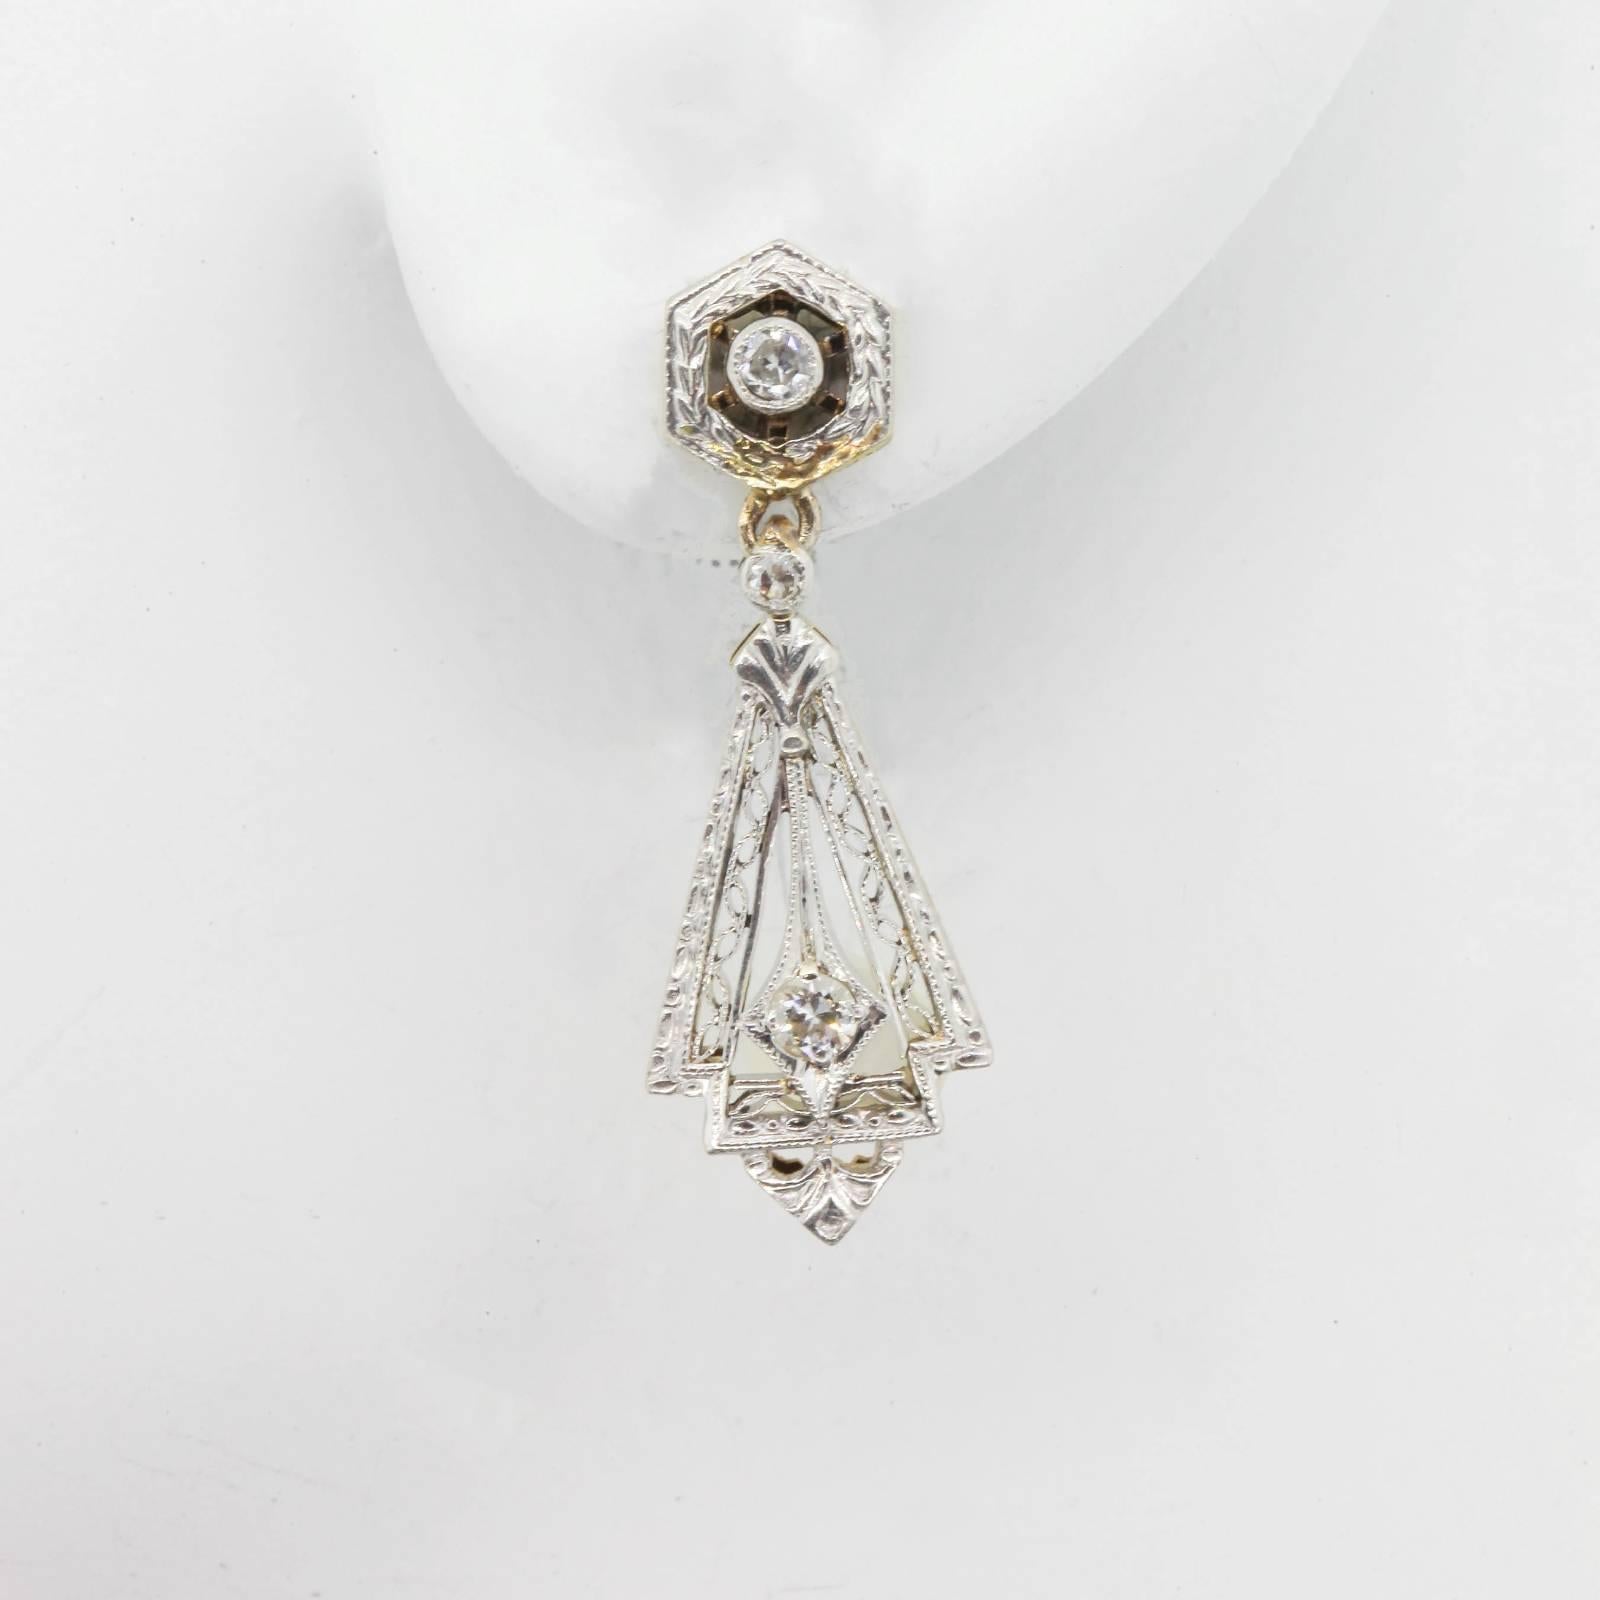 These antique earrings converge different lineal shapes resulting in a perfect union.  They are fabricated in platinum topped 14Kt yellow gold with delicate filigree and hand engraving, and are accented with 0.24 carart of old cut diamonds. 